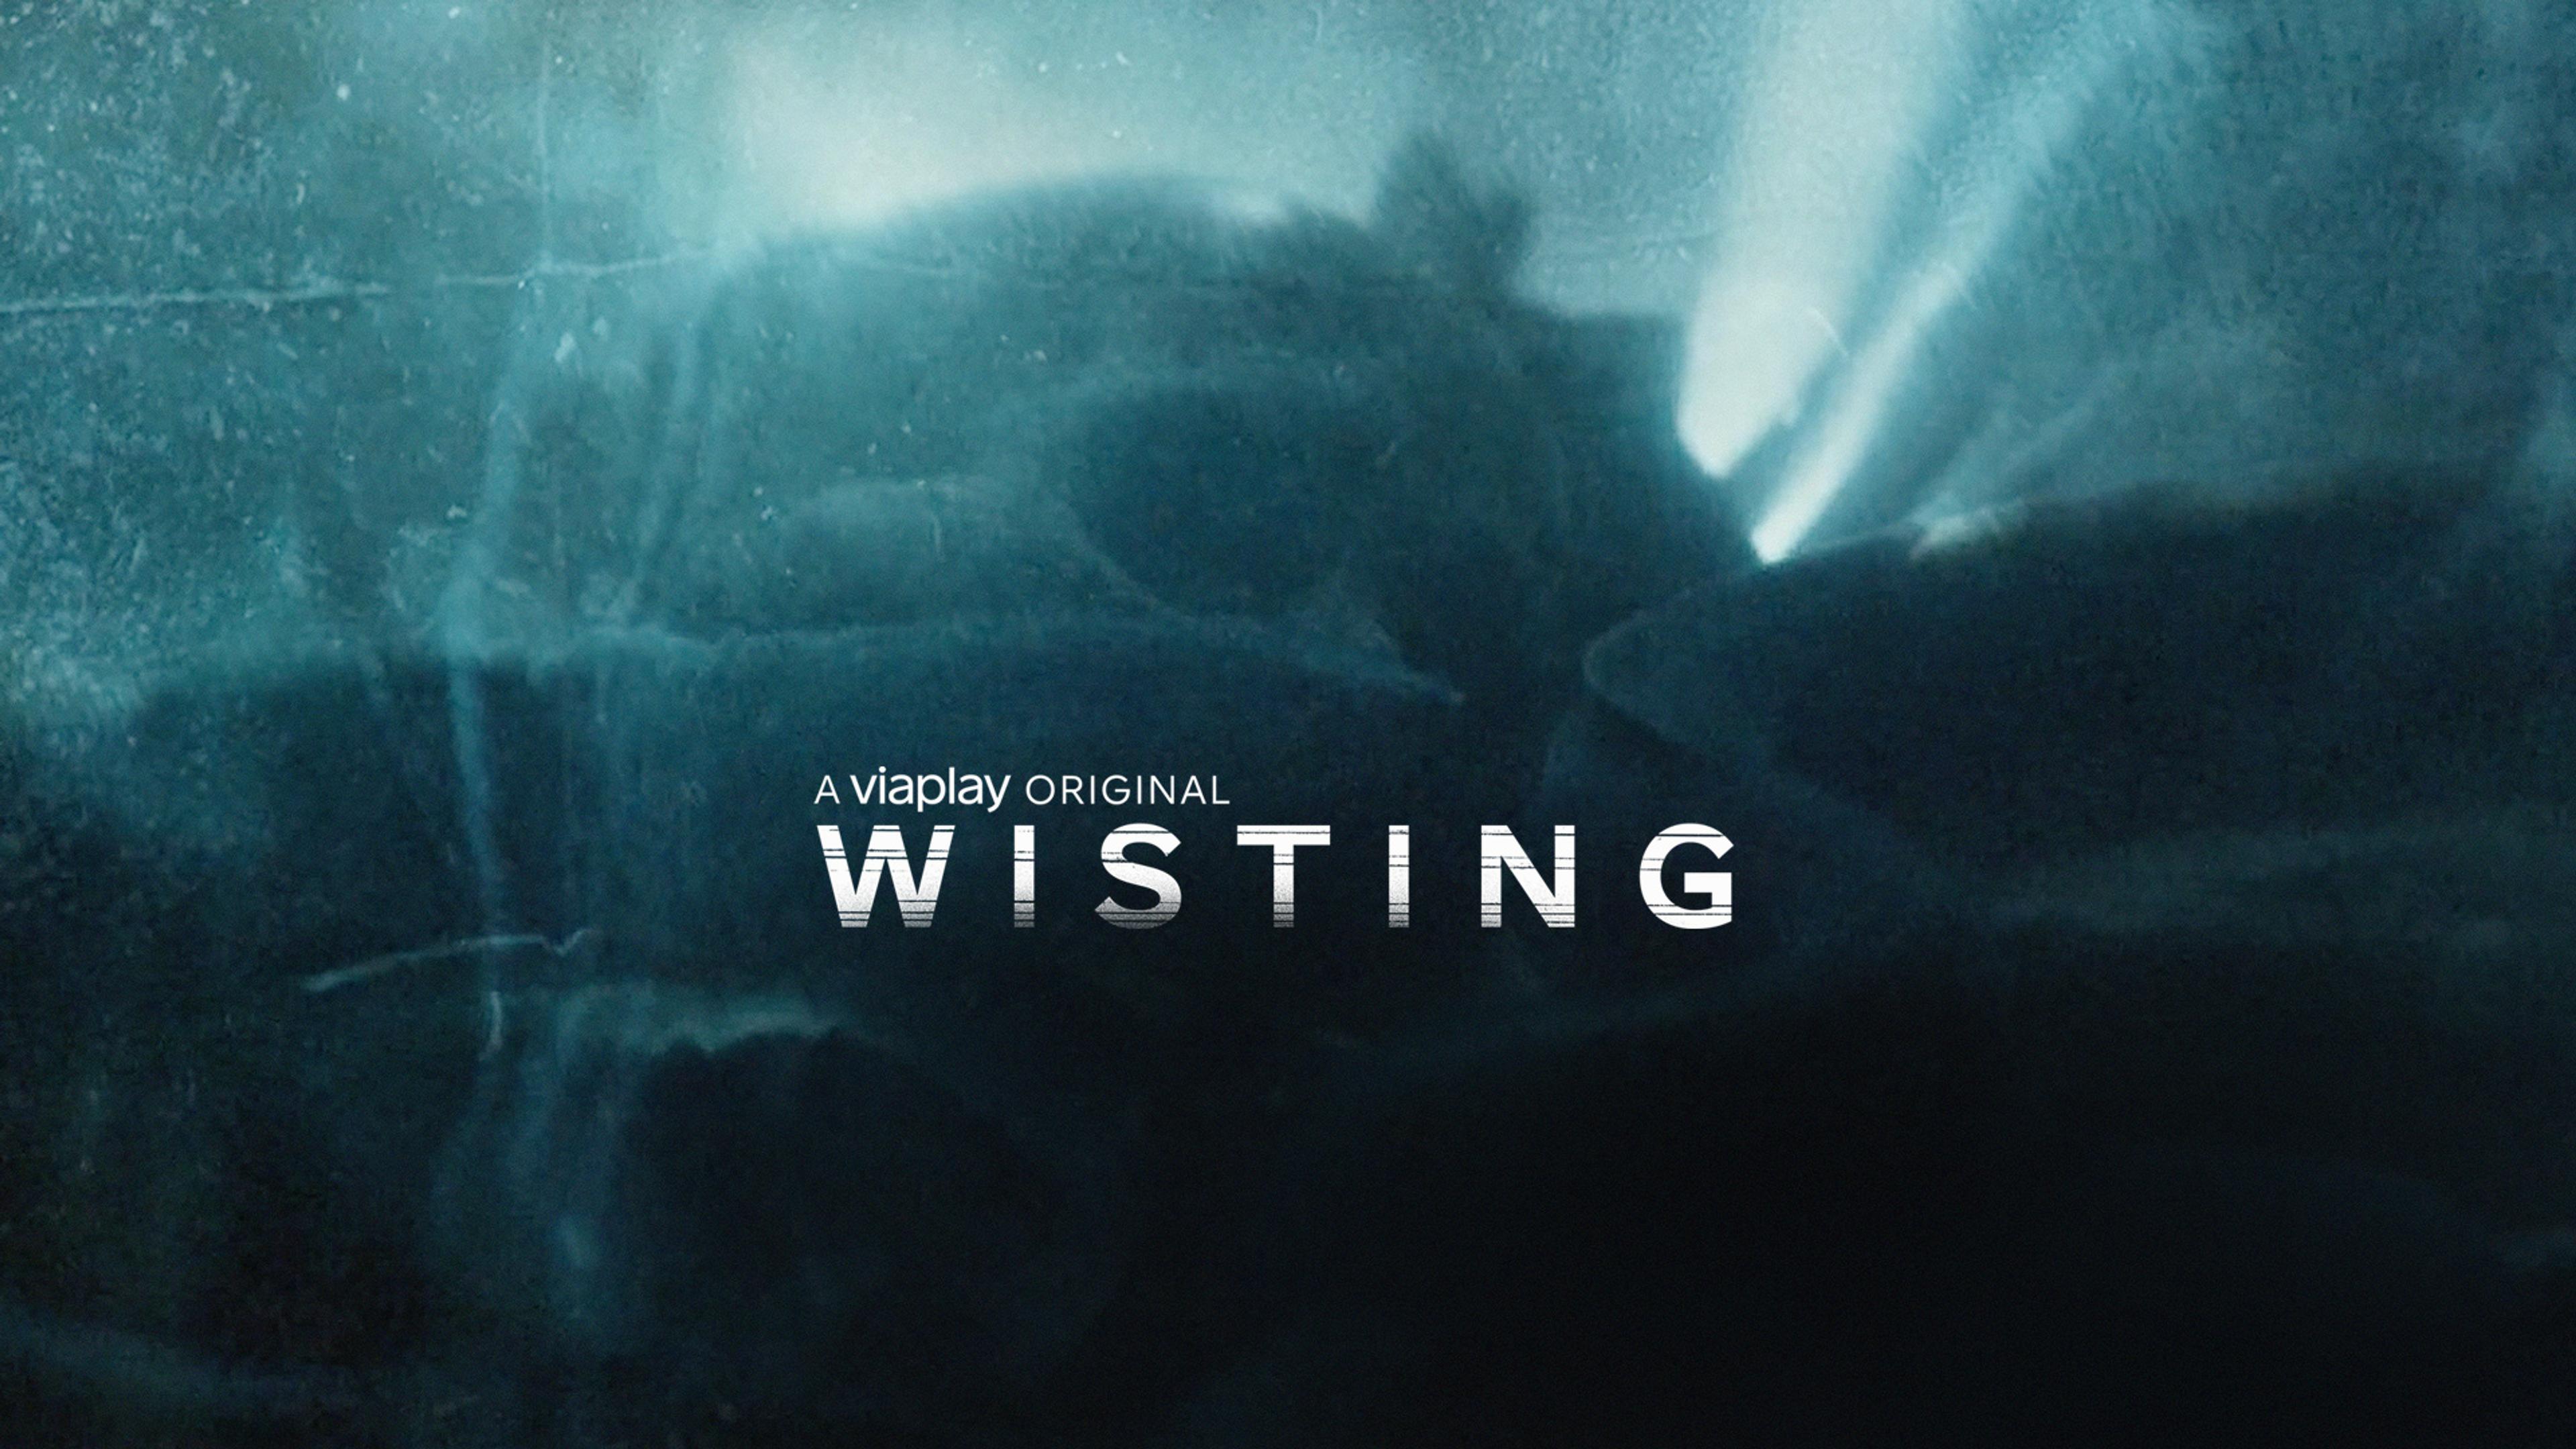 wisting tv series title logo on a blurry rainy background